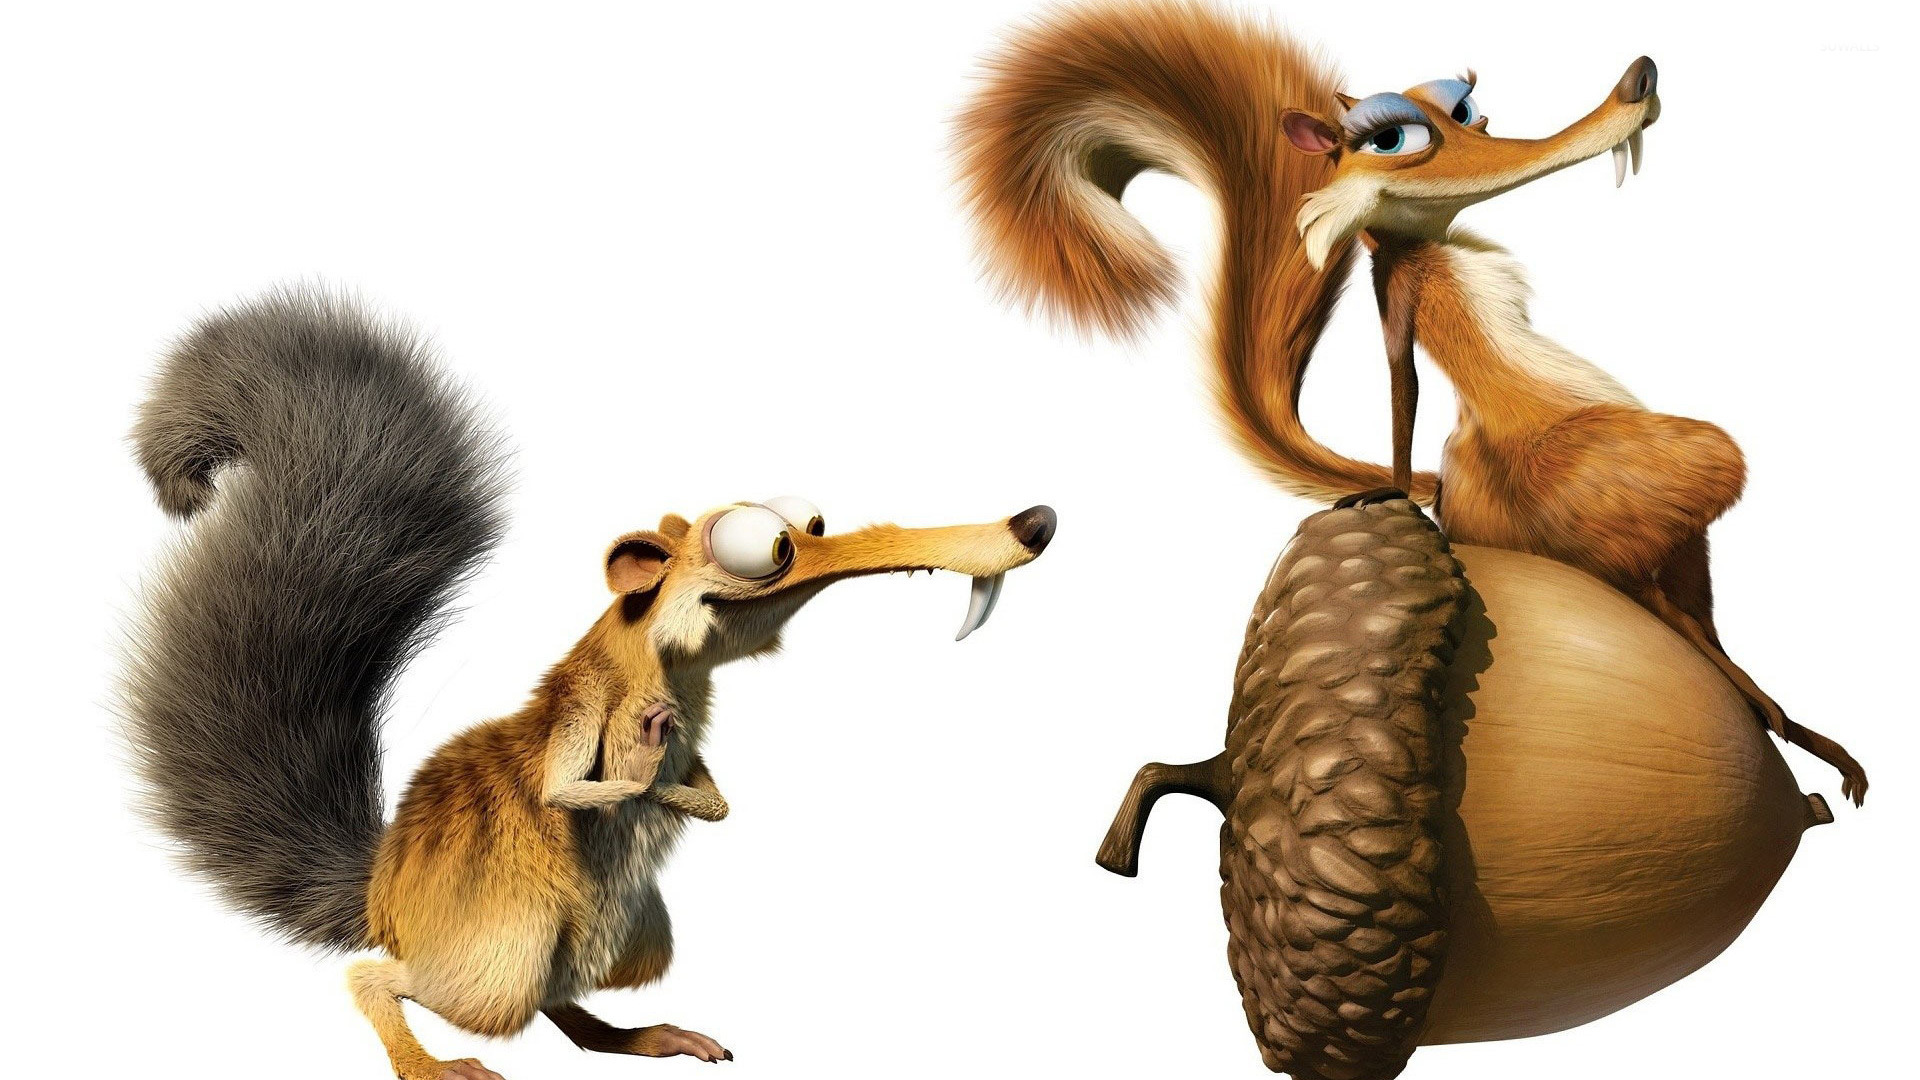 Ice Age: Dawn of the Dinosaurs wallpaper - Cartoon wallpapers - #9993.